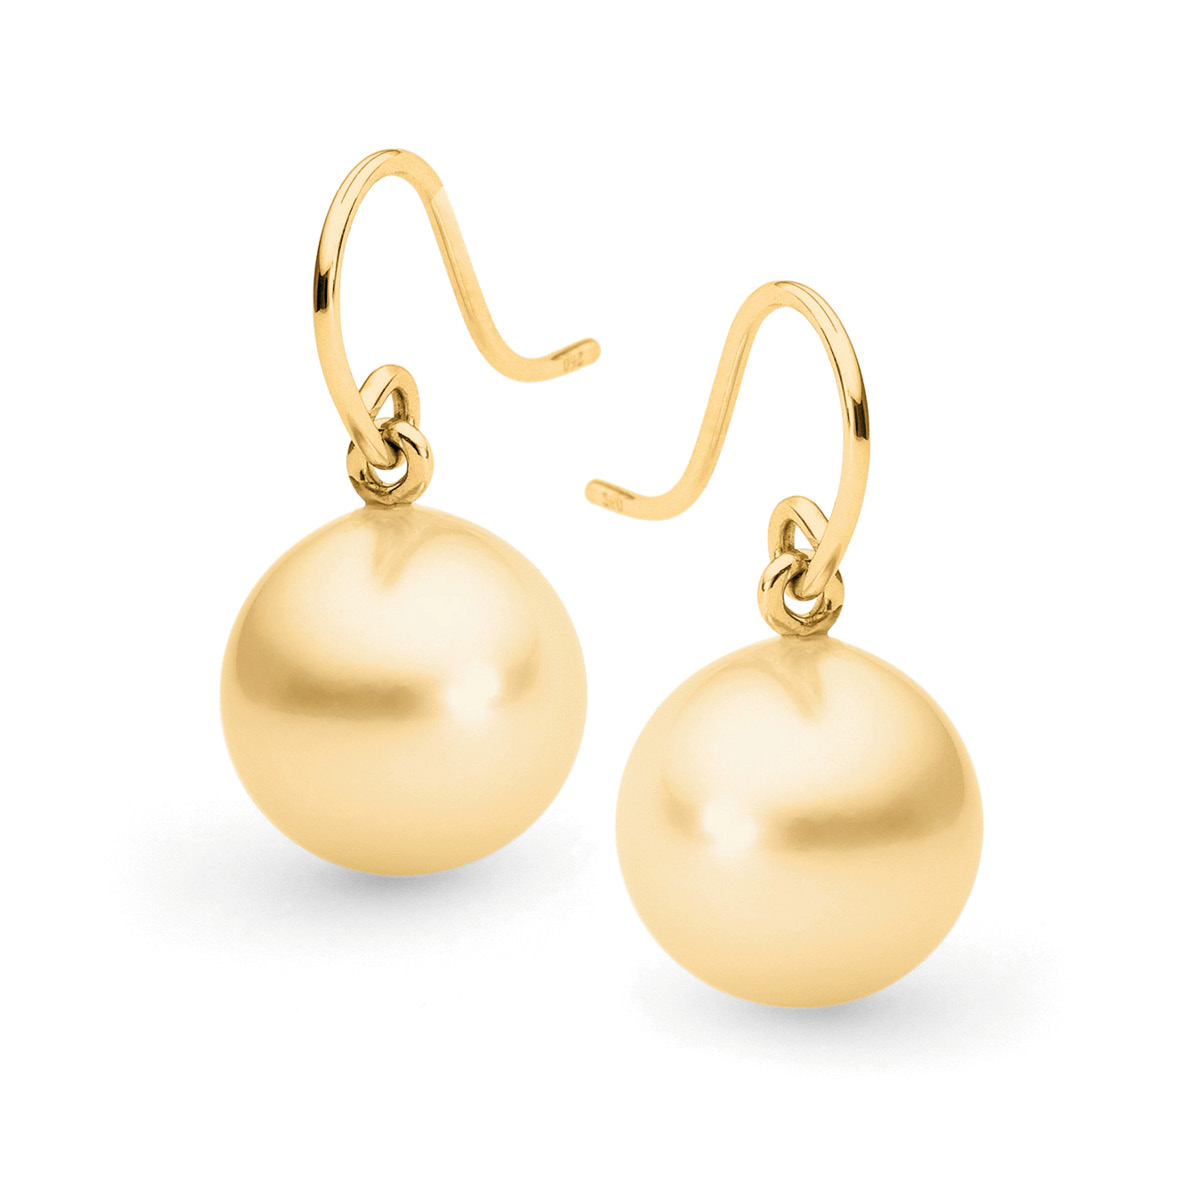 Fine French Hook Articulated Pearl Earrings - Allure South Sea Pearls